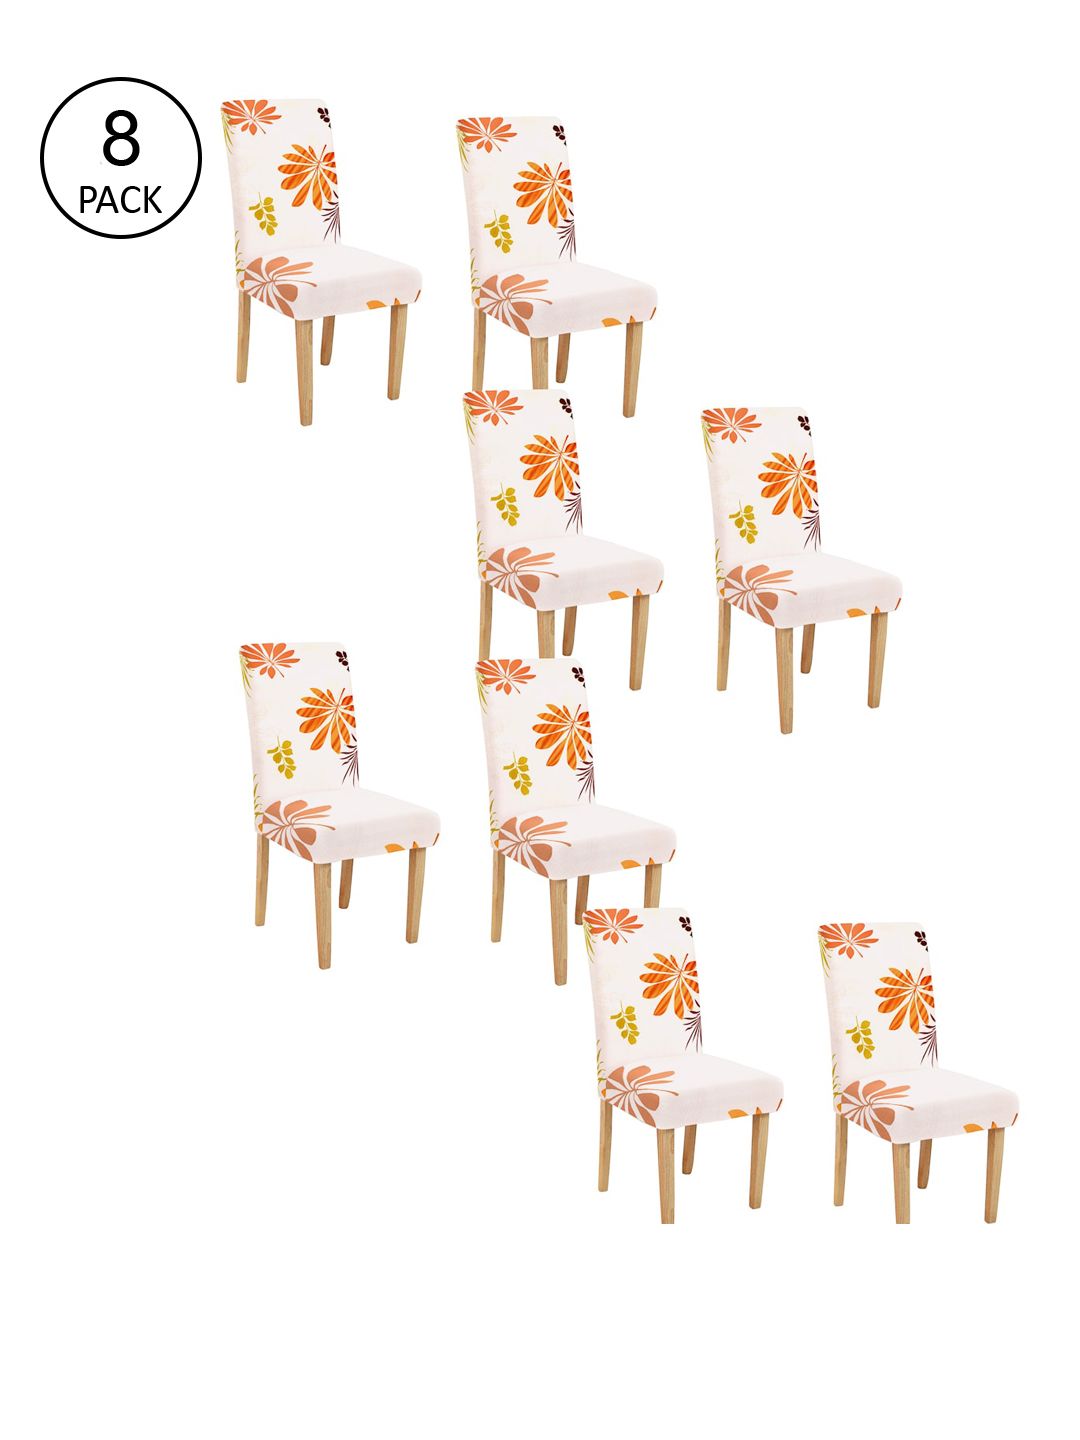 Cortina Set Of 8 White & Orange Printed Chair Covers Price in India